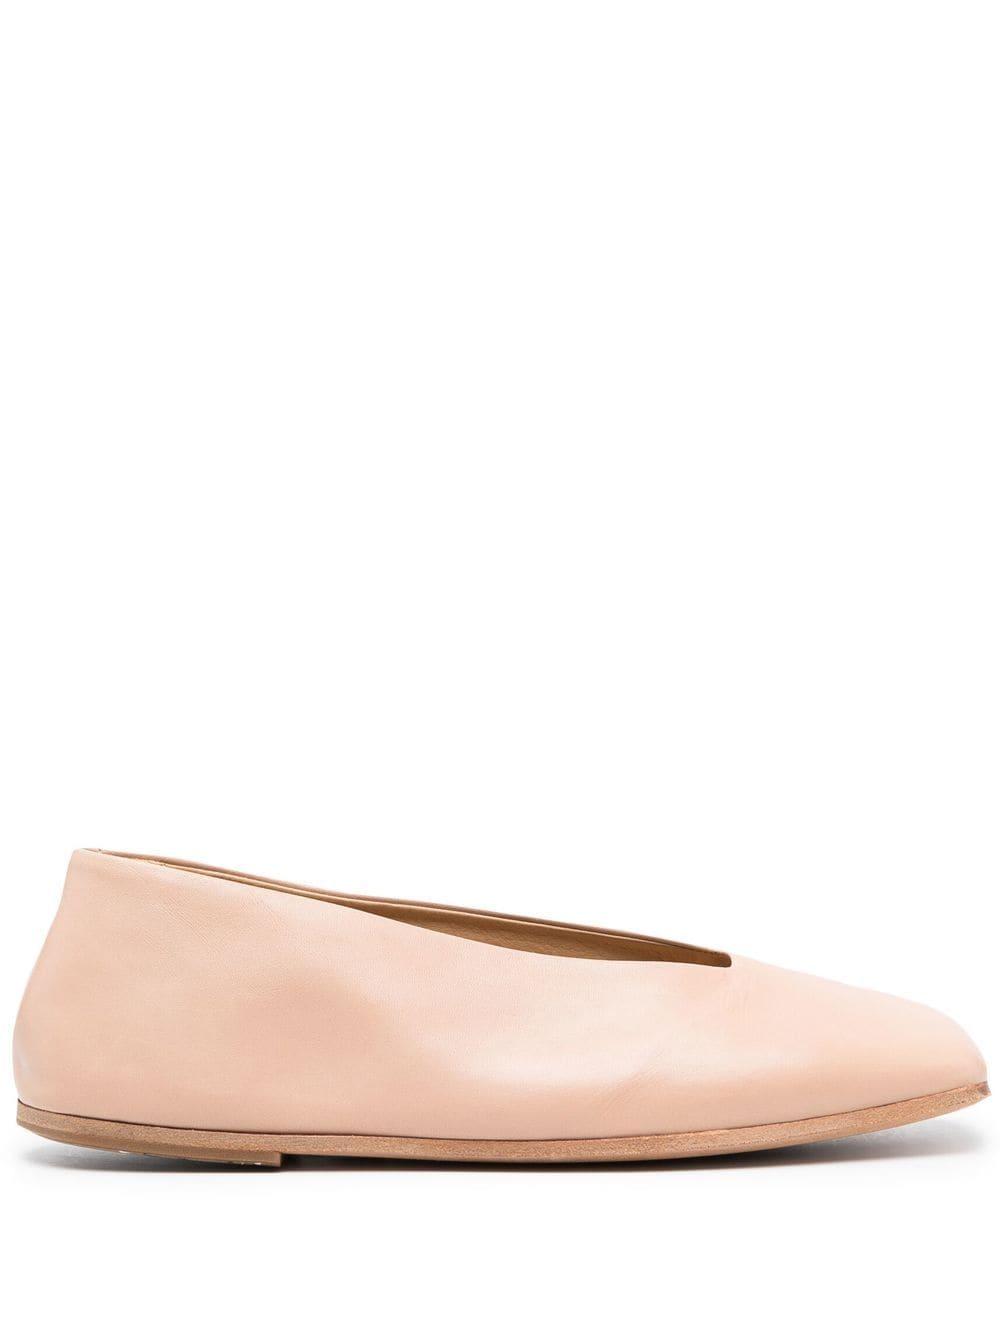 Marsèll Square-toe Leather Ballerina Shoes in Pink | Lyst